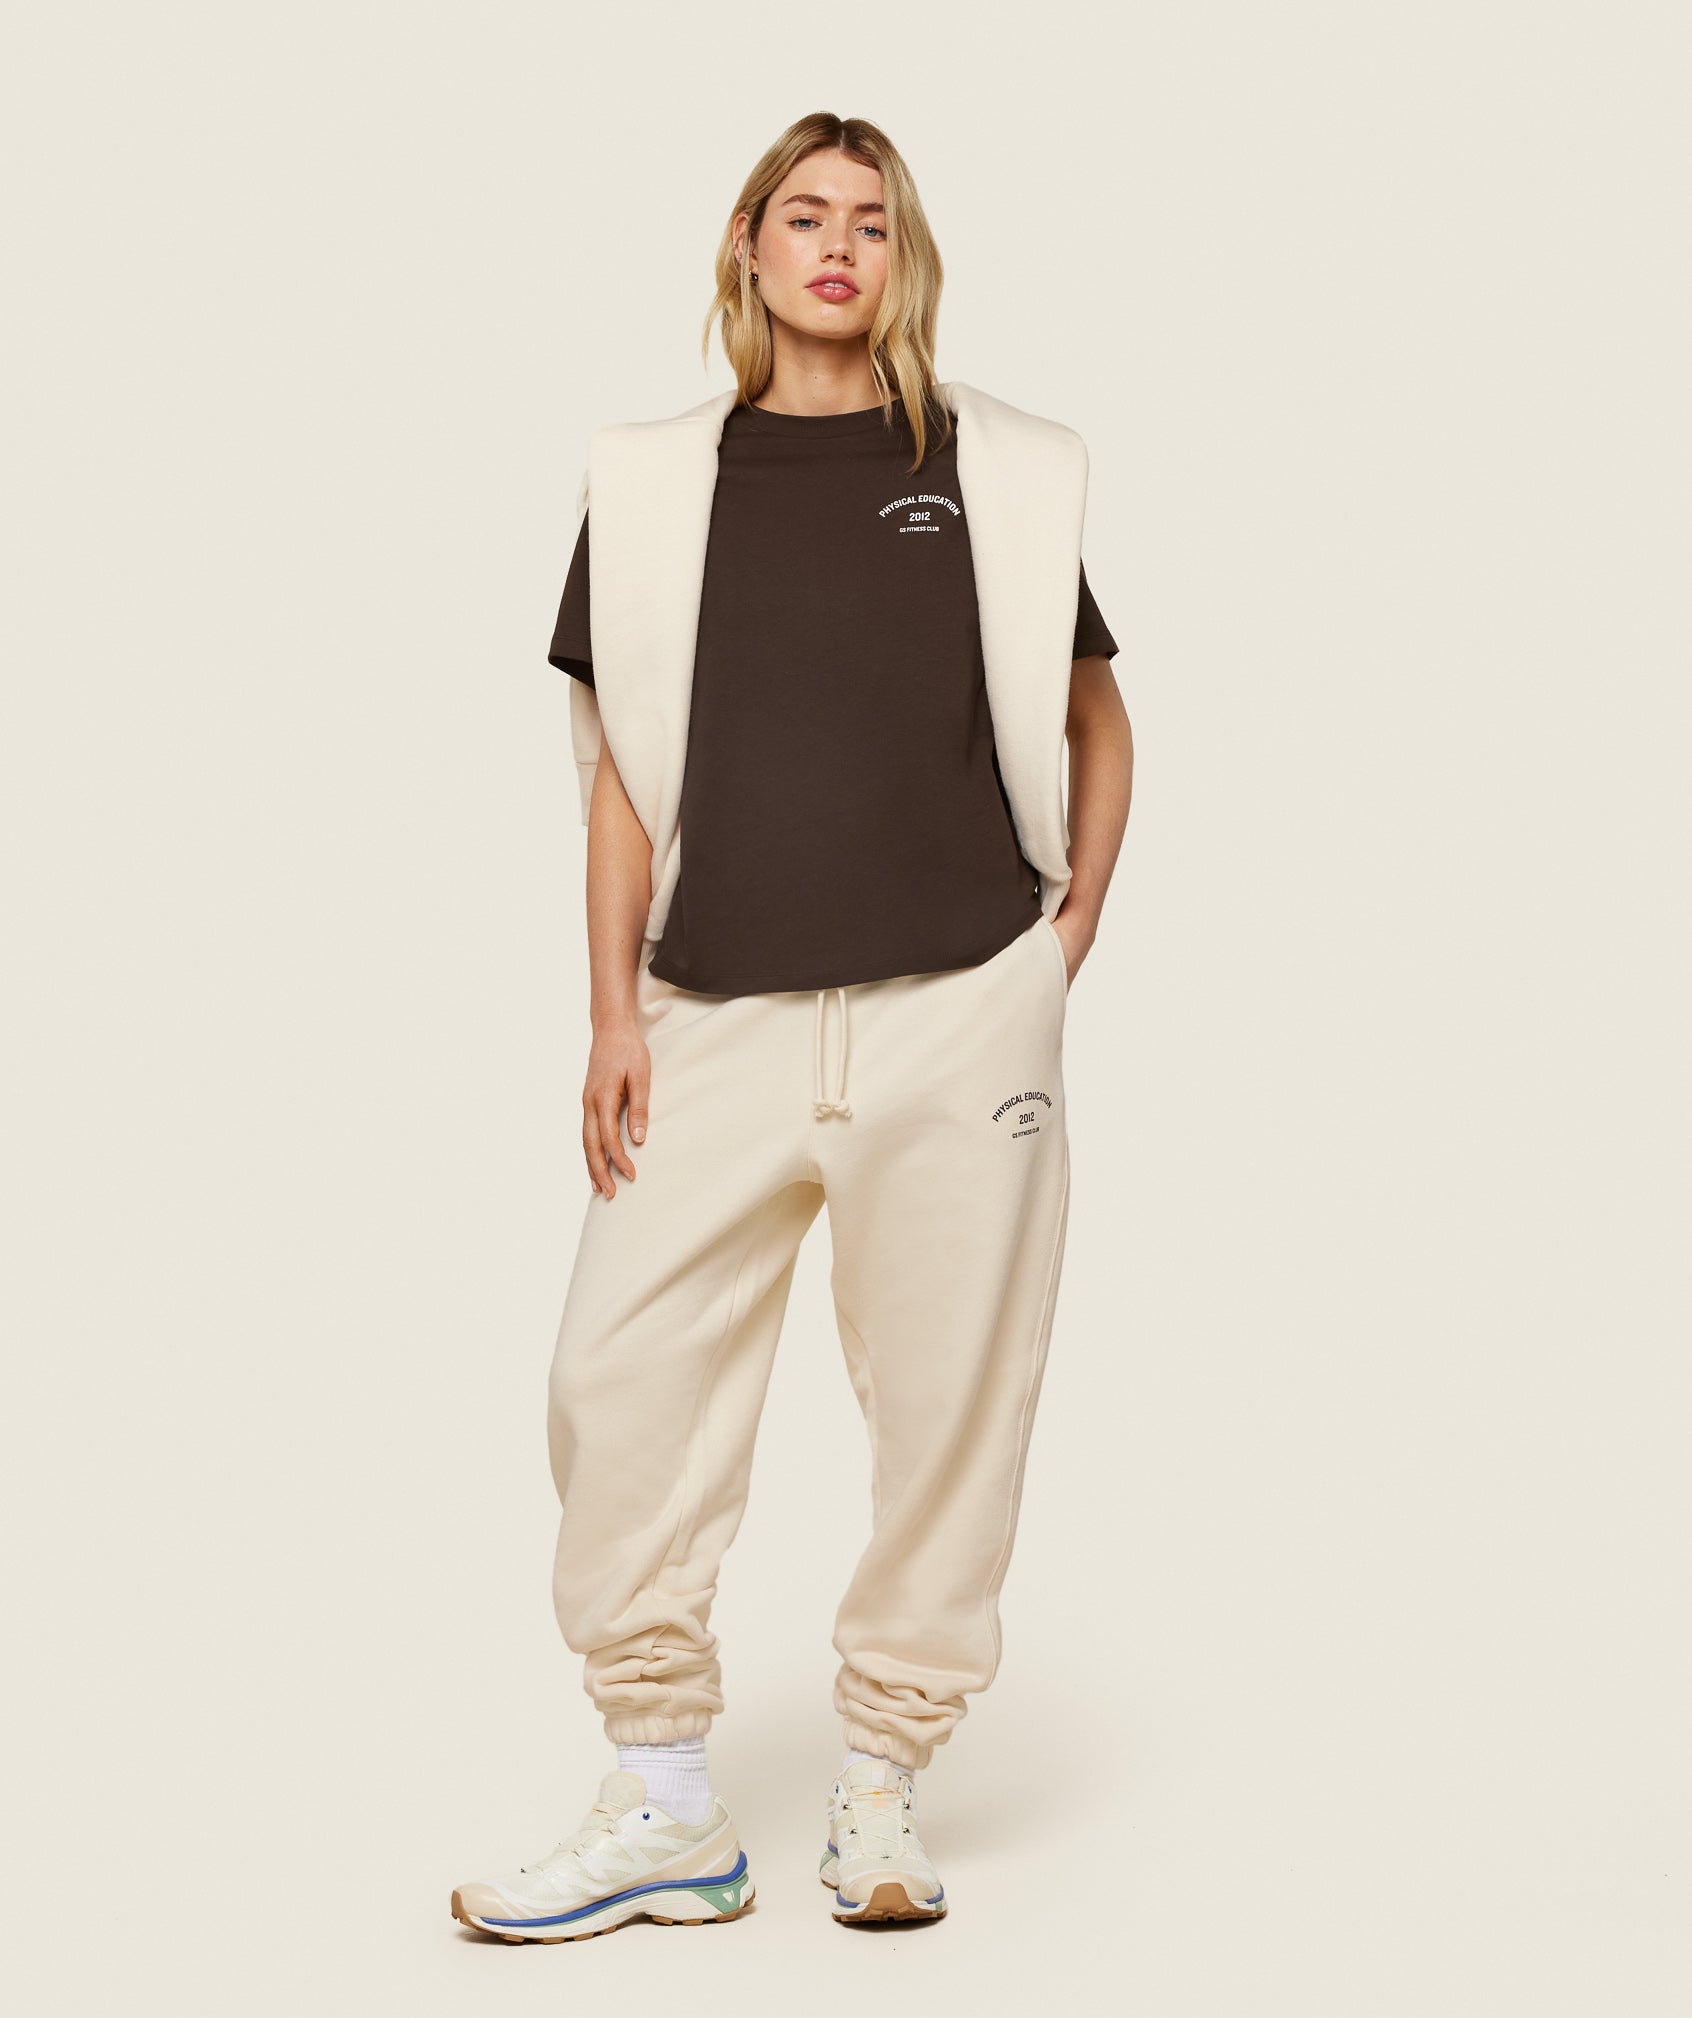 Phys Ed Graphic Sweatpants in Ecru White - view 4